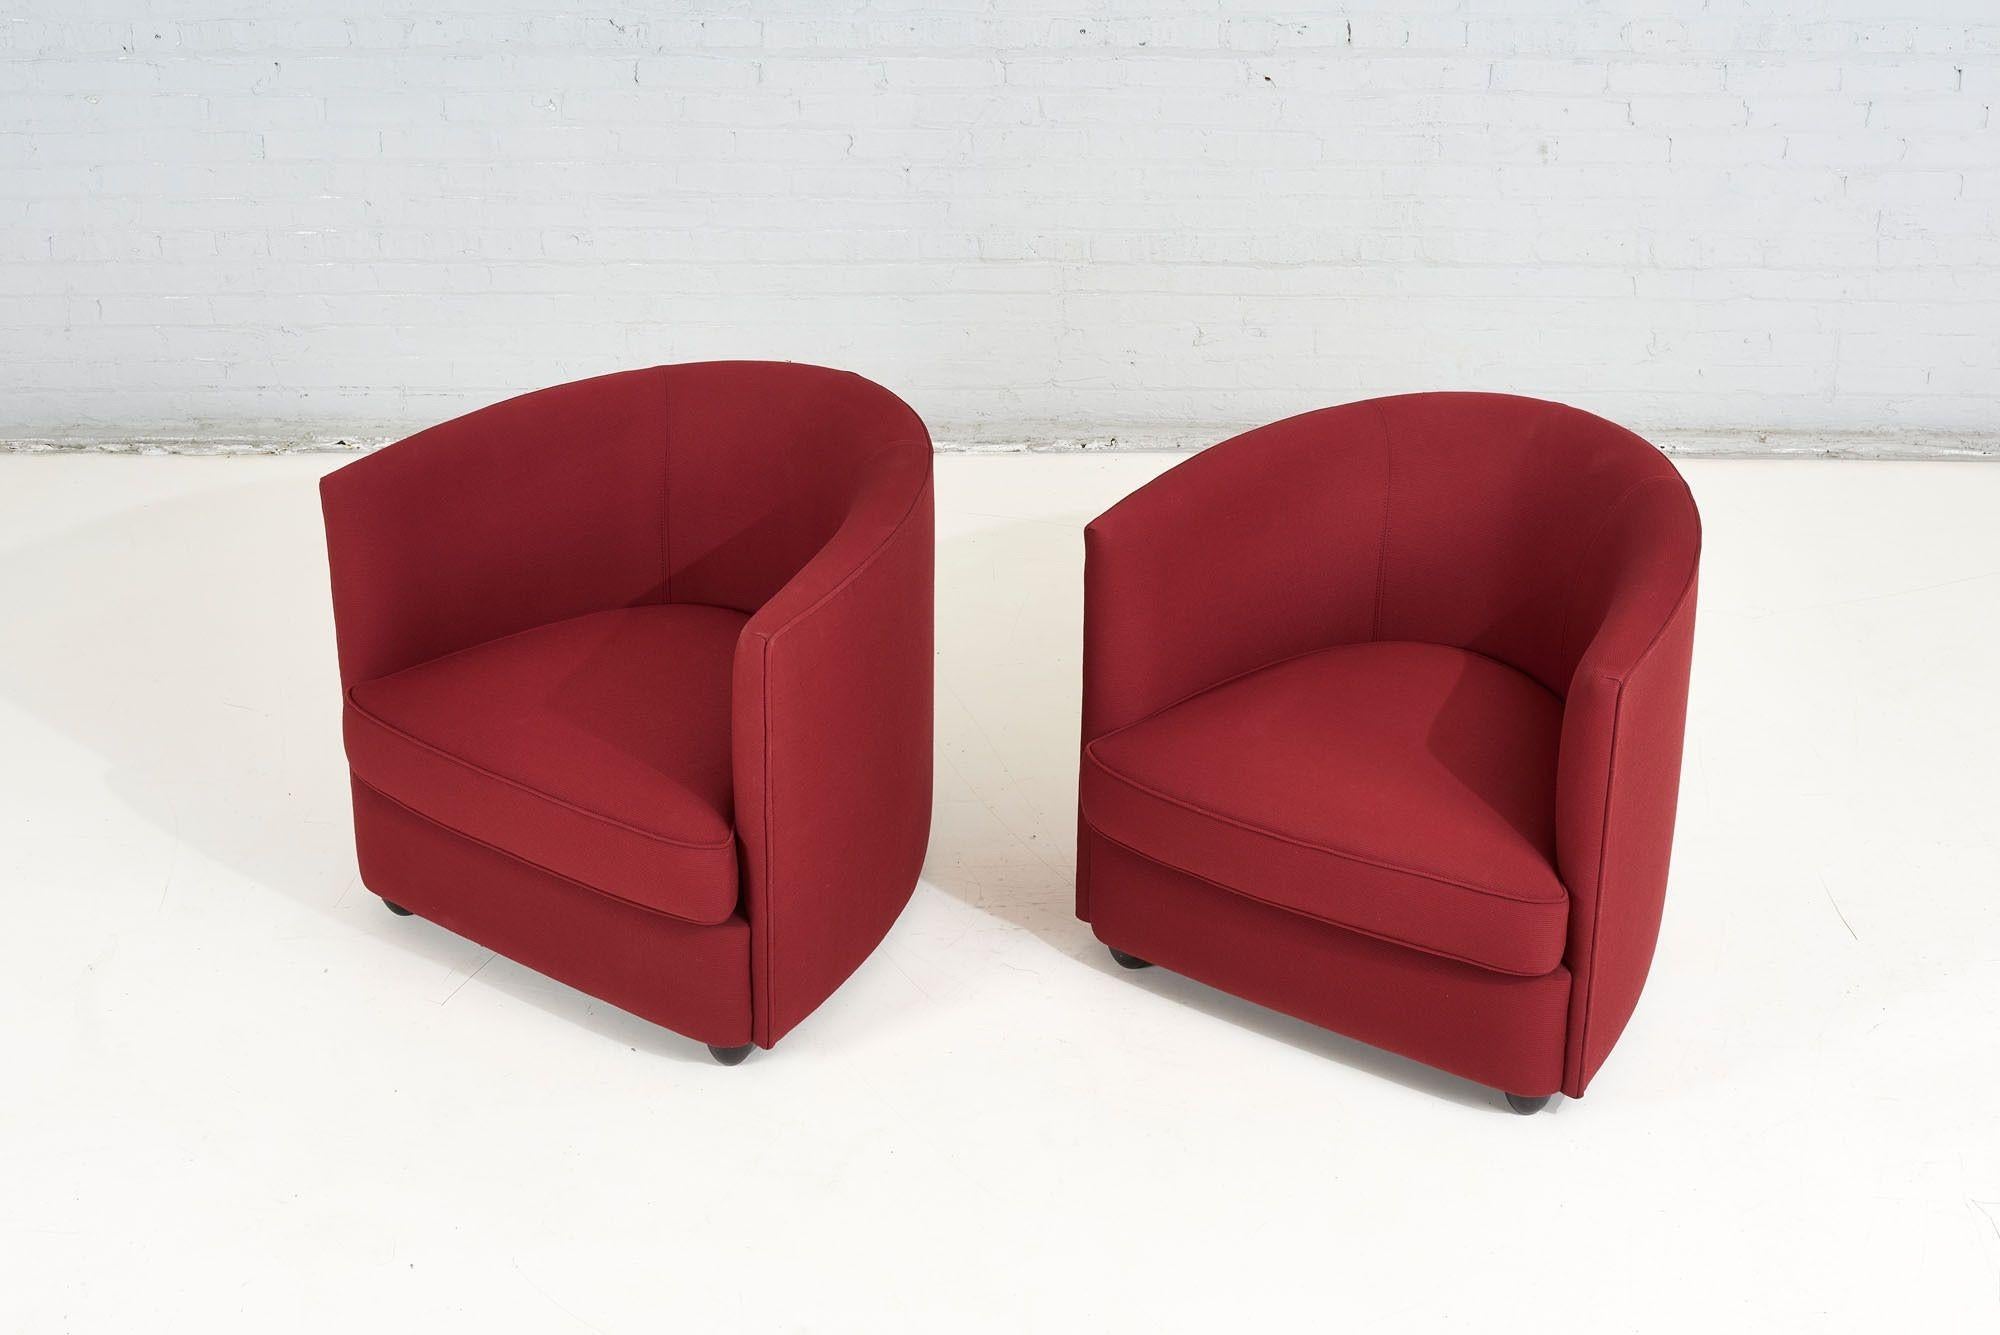 Andree Putman Pair Crescent Lounge Chair, 1980 In Good Condition For Sale In Chicago, IL